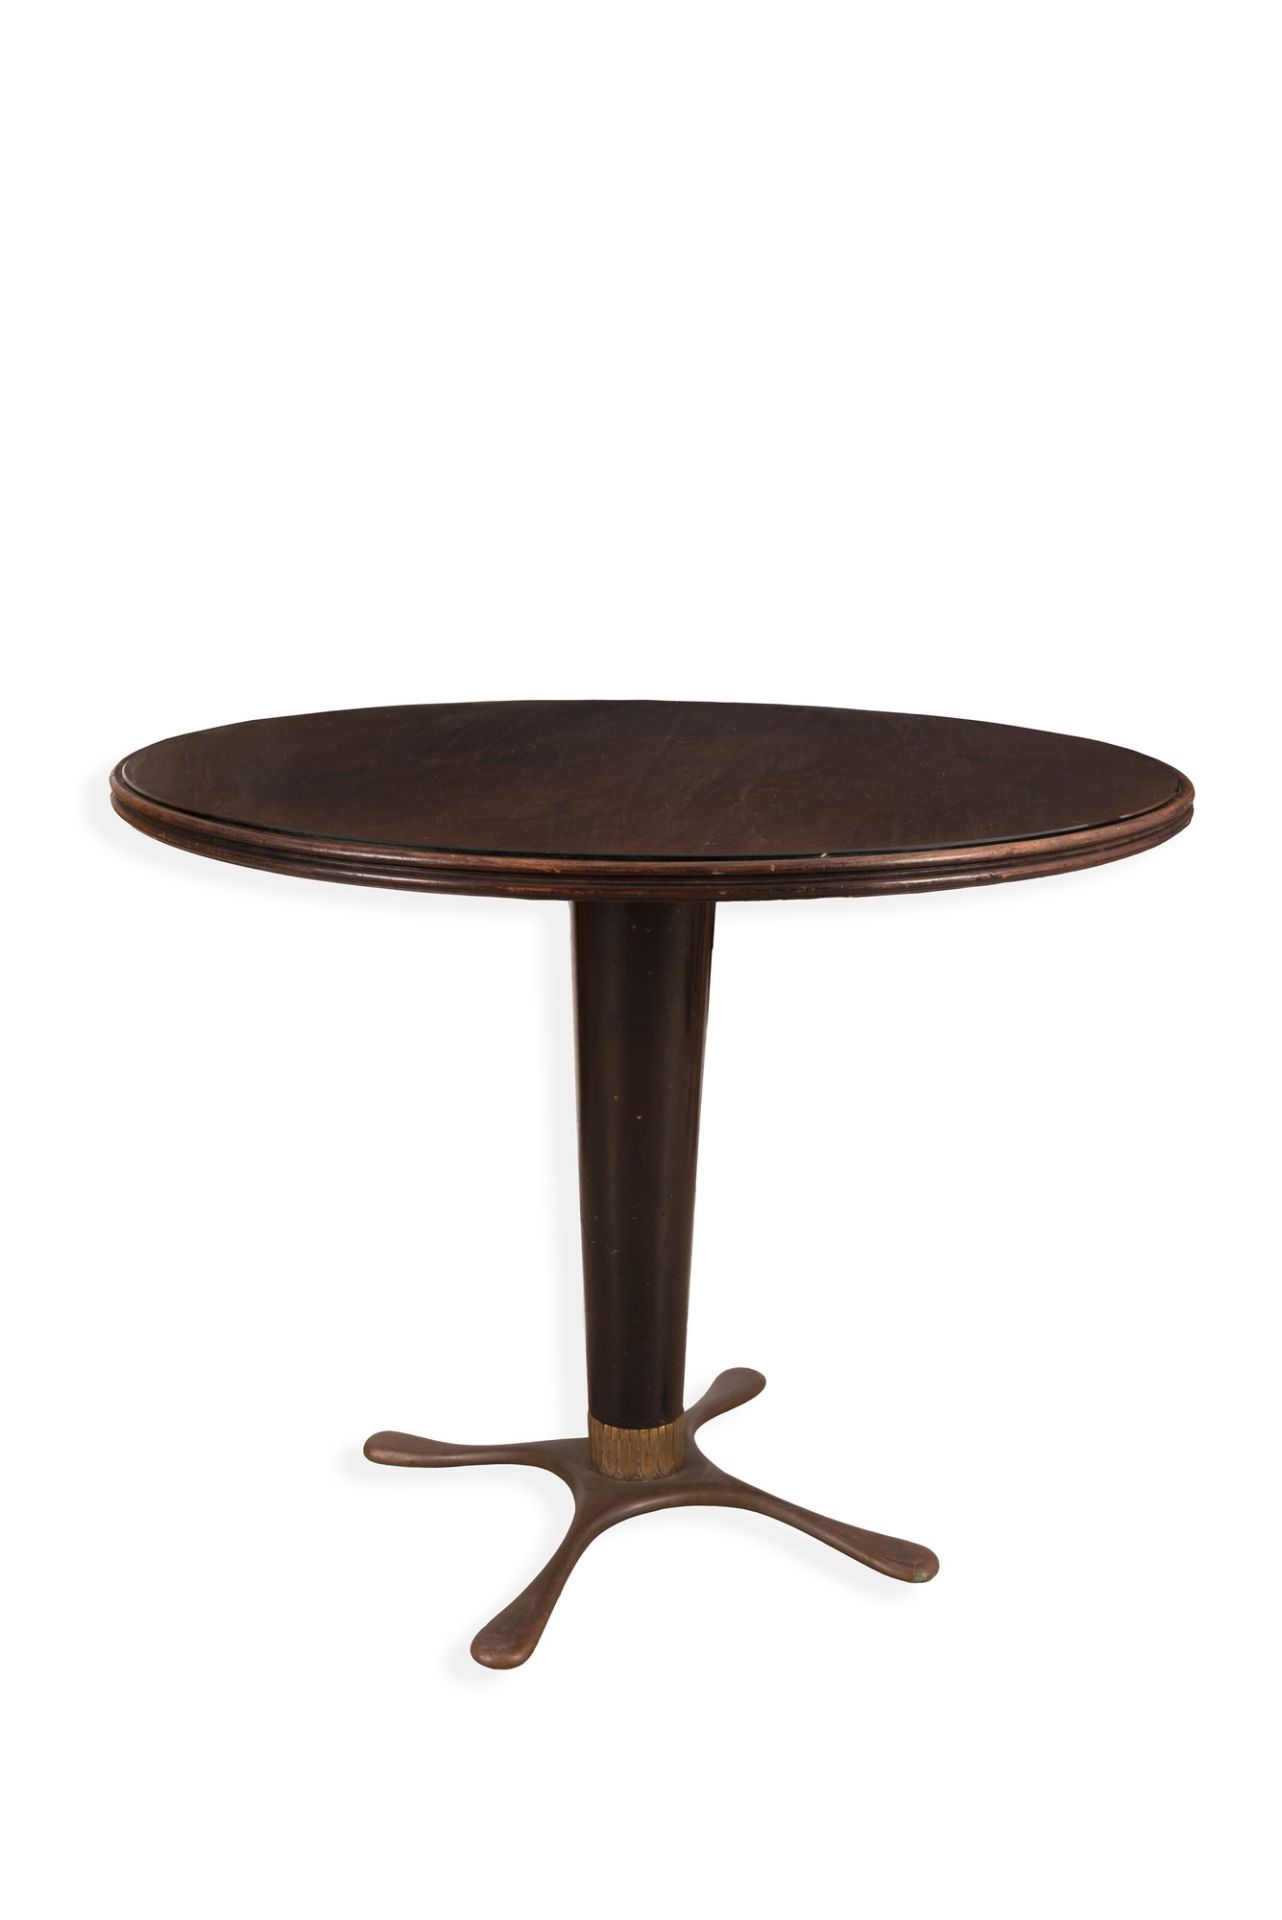 English Manufacture, 19th Century English Manufacture Round rosewood coffee table - Image 2 of 3